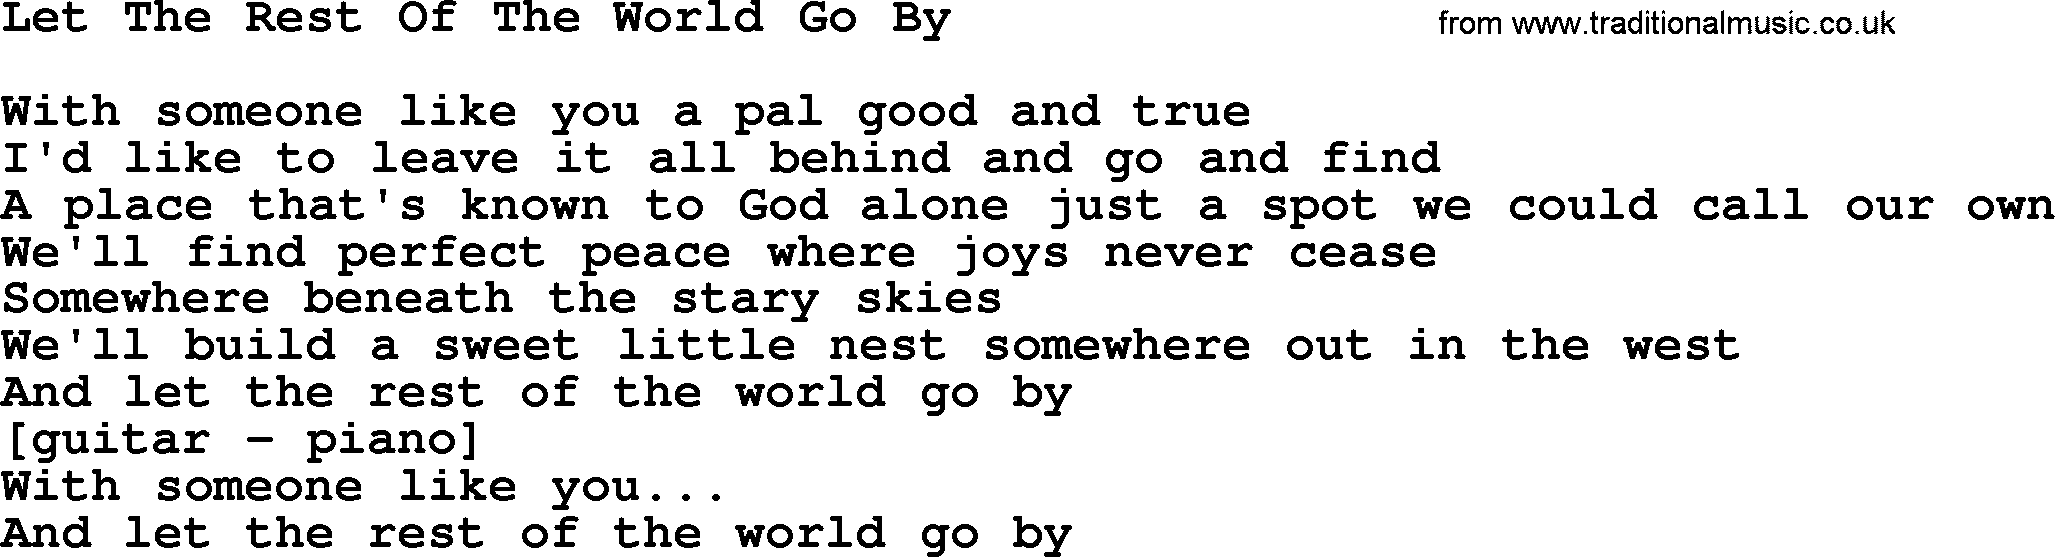 Willie Nelson song: Let The Rest Of The World Go By lyrics